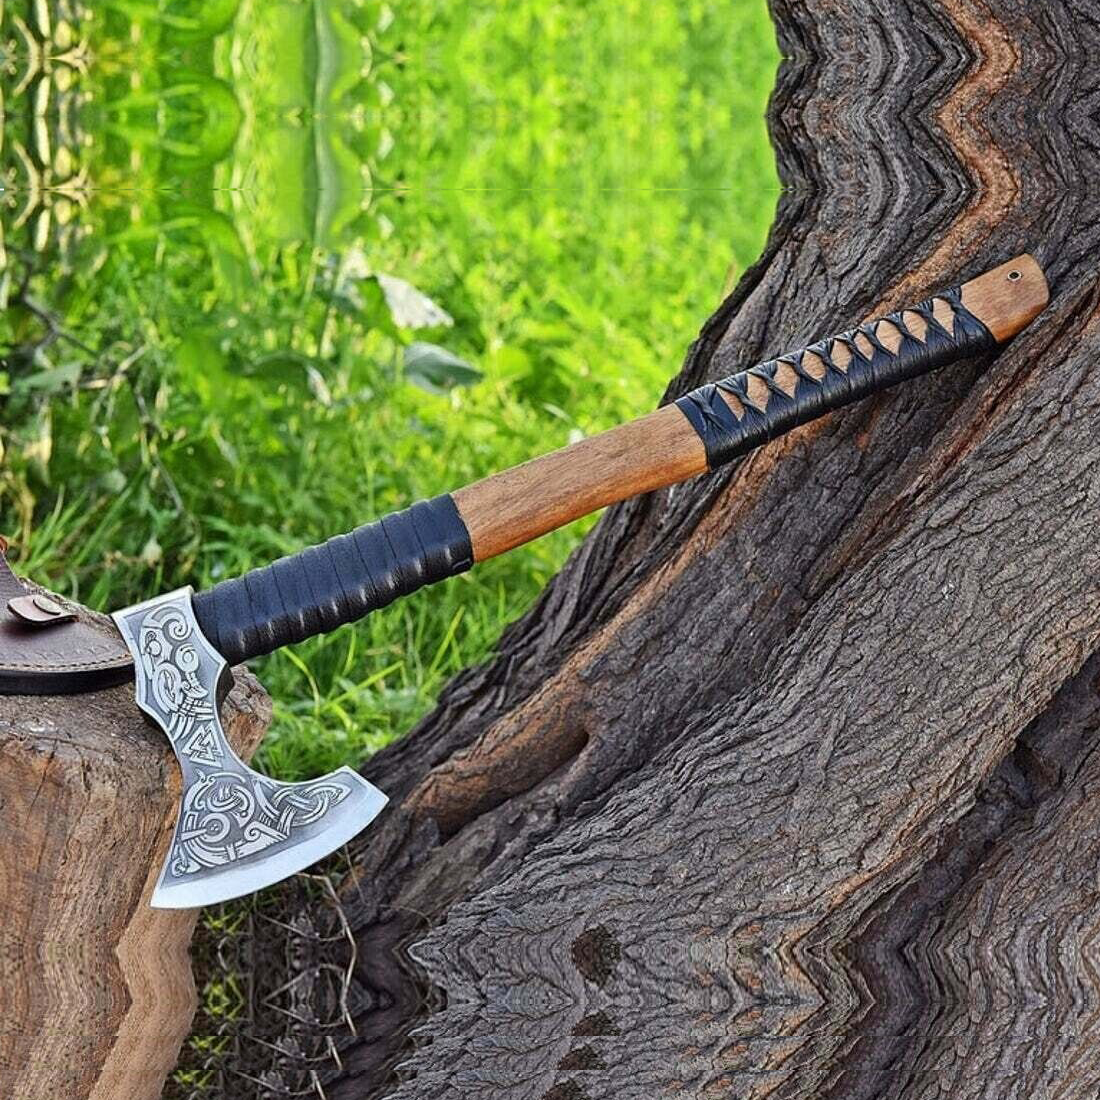 Hand Forged Carbon Steel Axe | Handmade Viking Axe | Camping Hunting and Outdoor axe | Xmas Gift